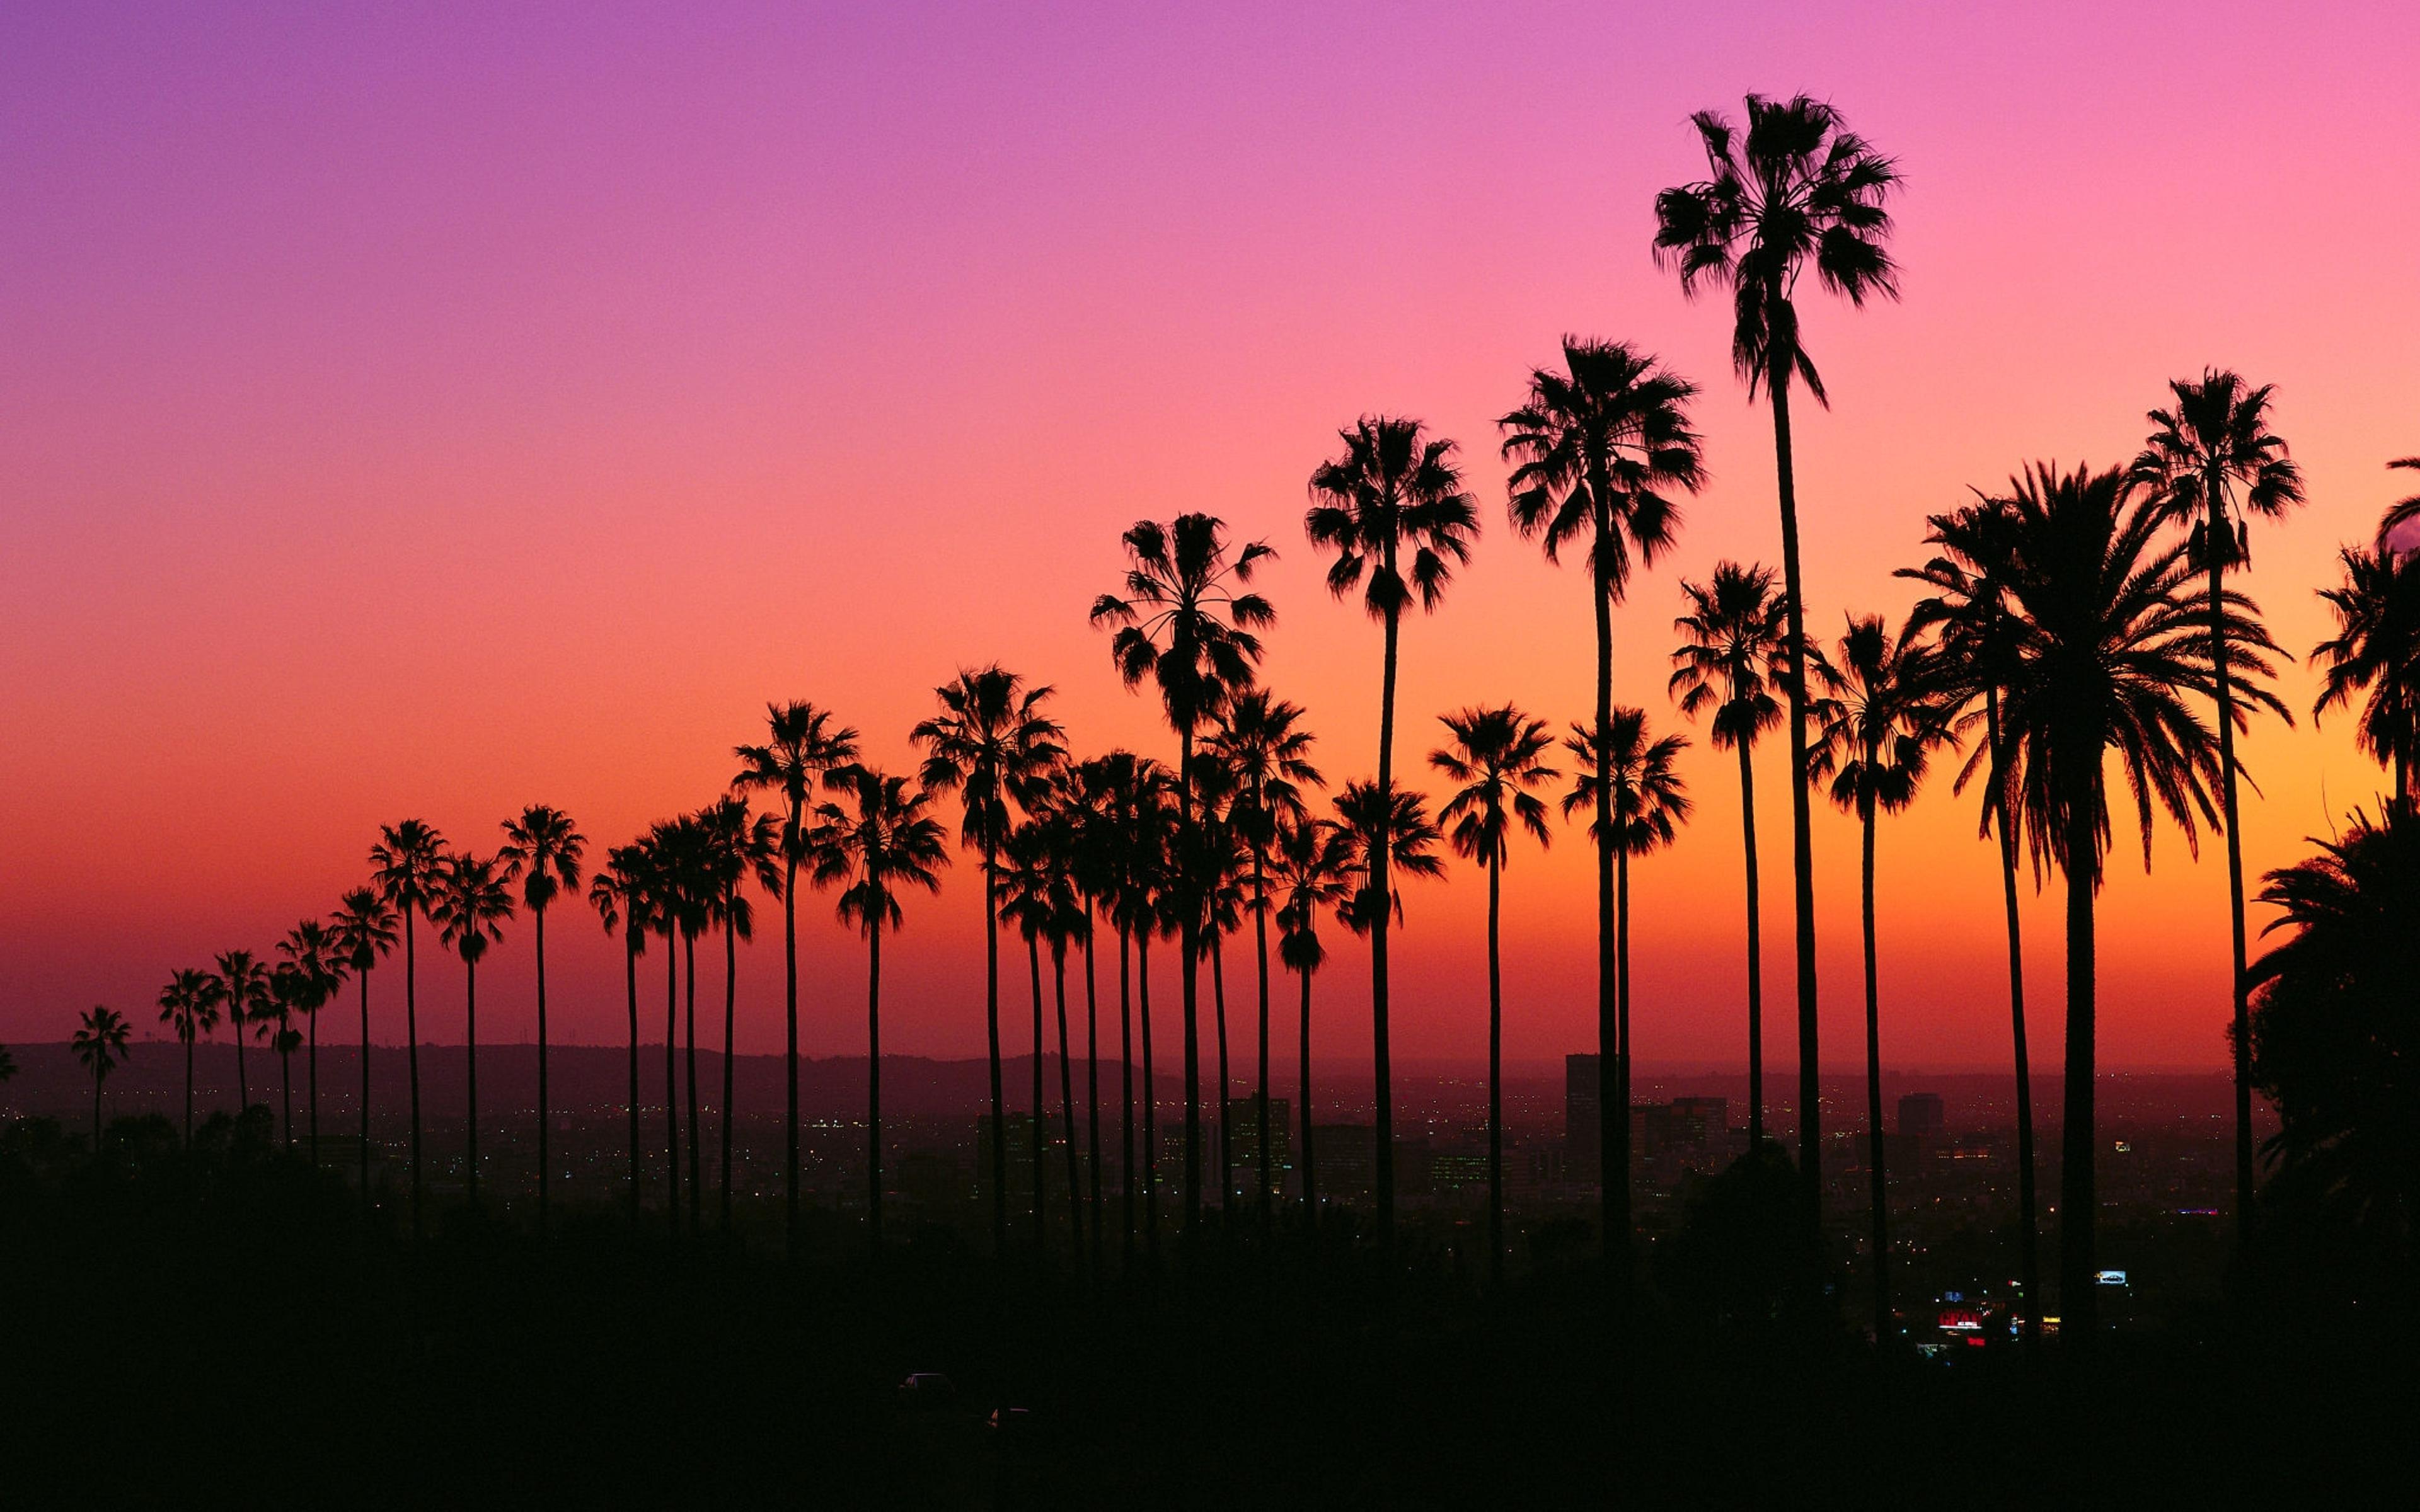 A sunset with palm trees and buildings in the background - Los Angeles